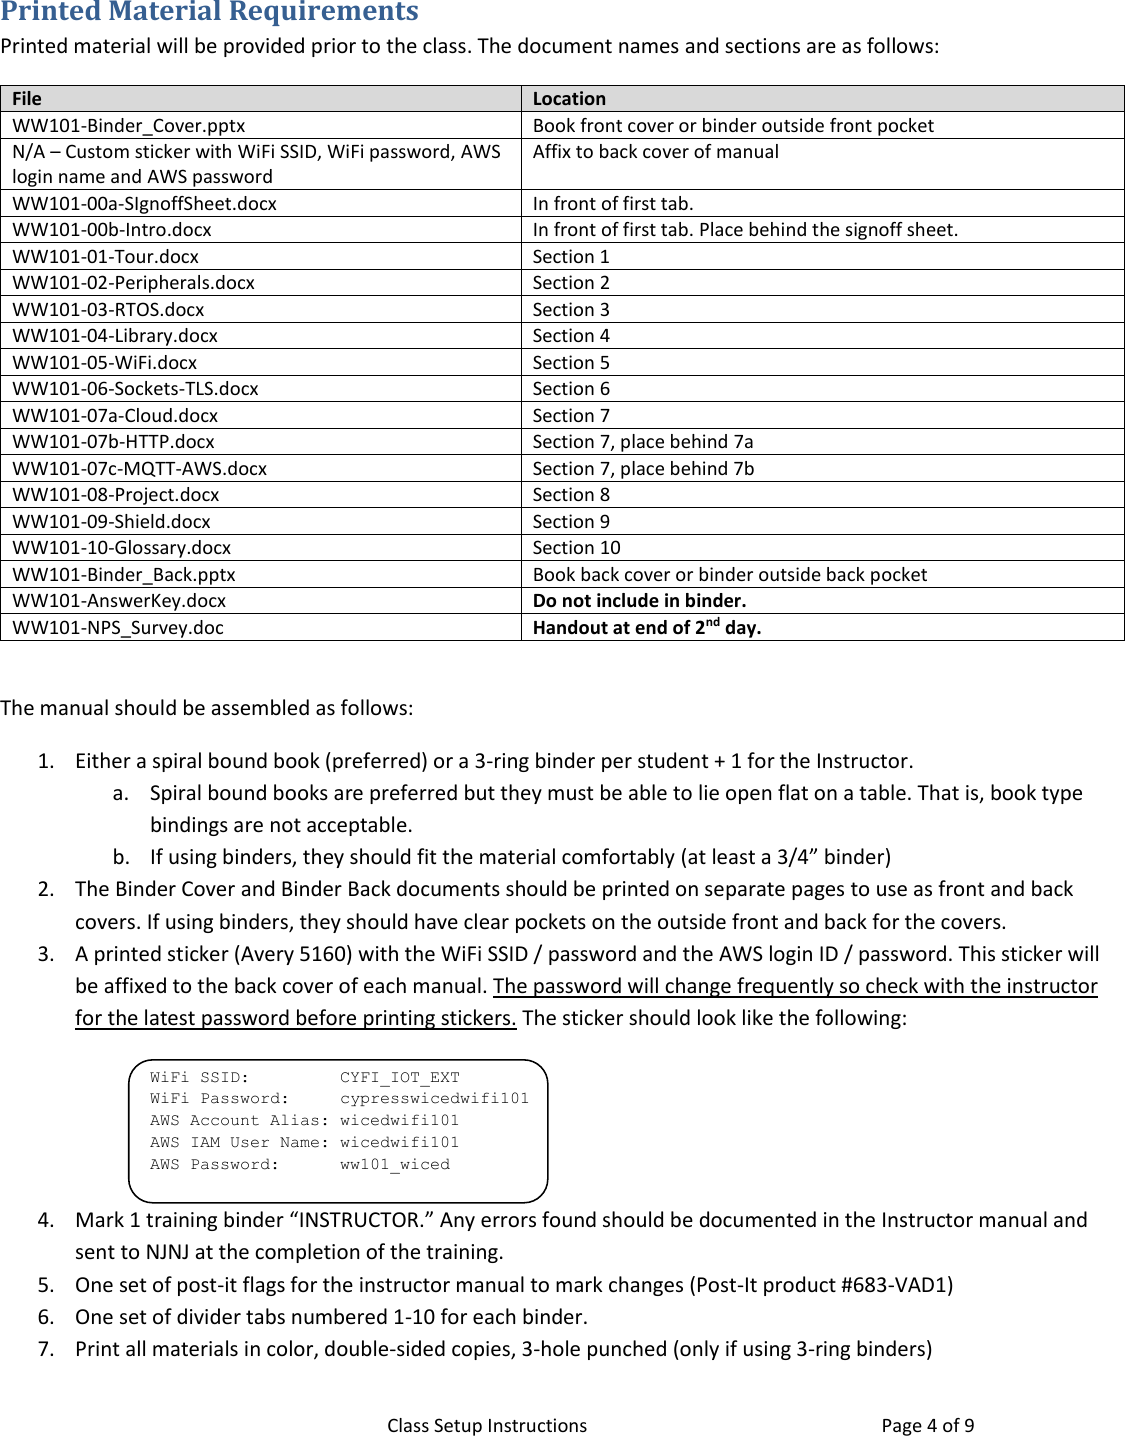 Page 4 of 9 - Class Setup Instructions